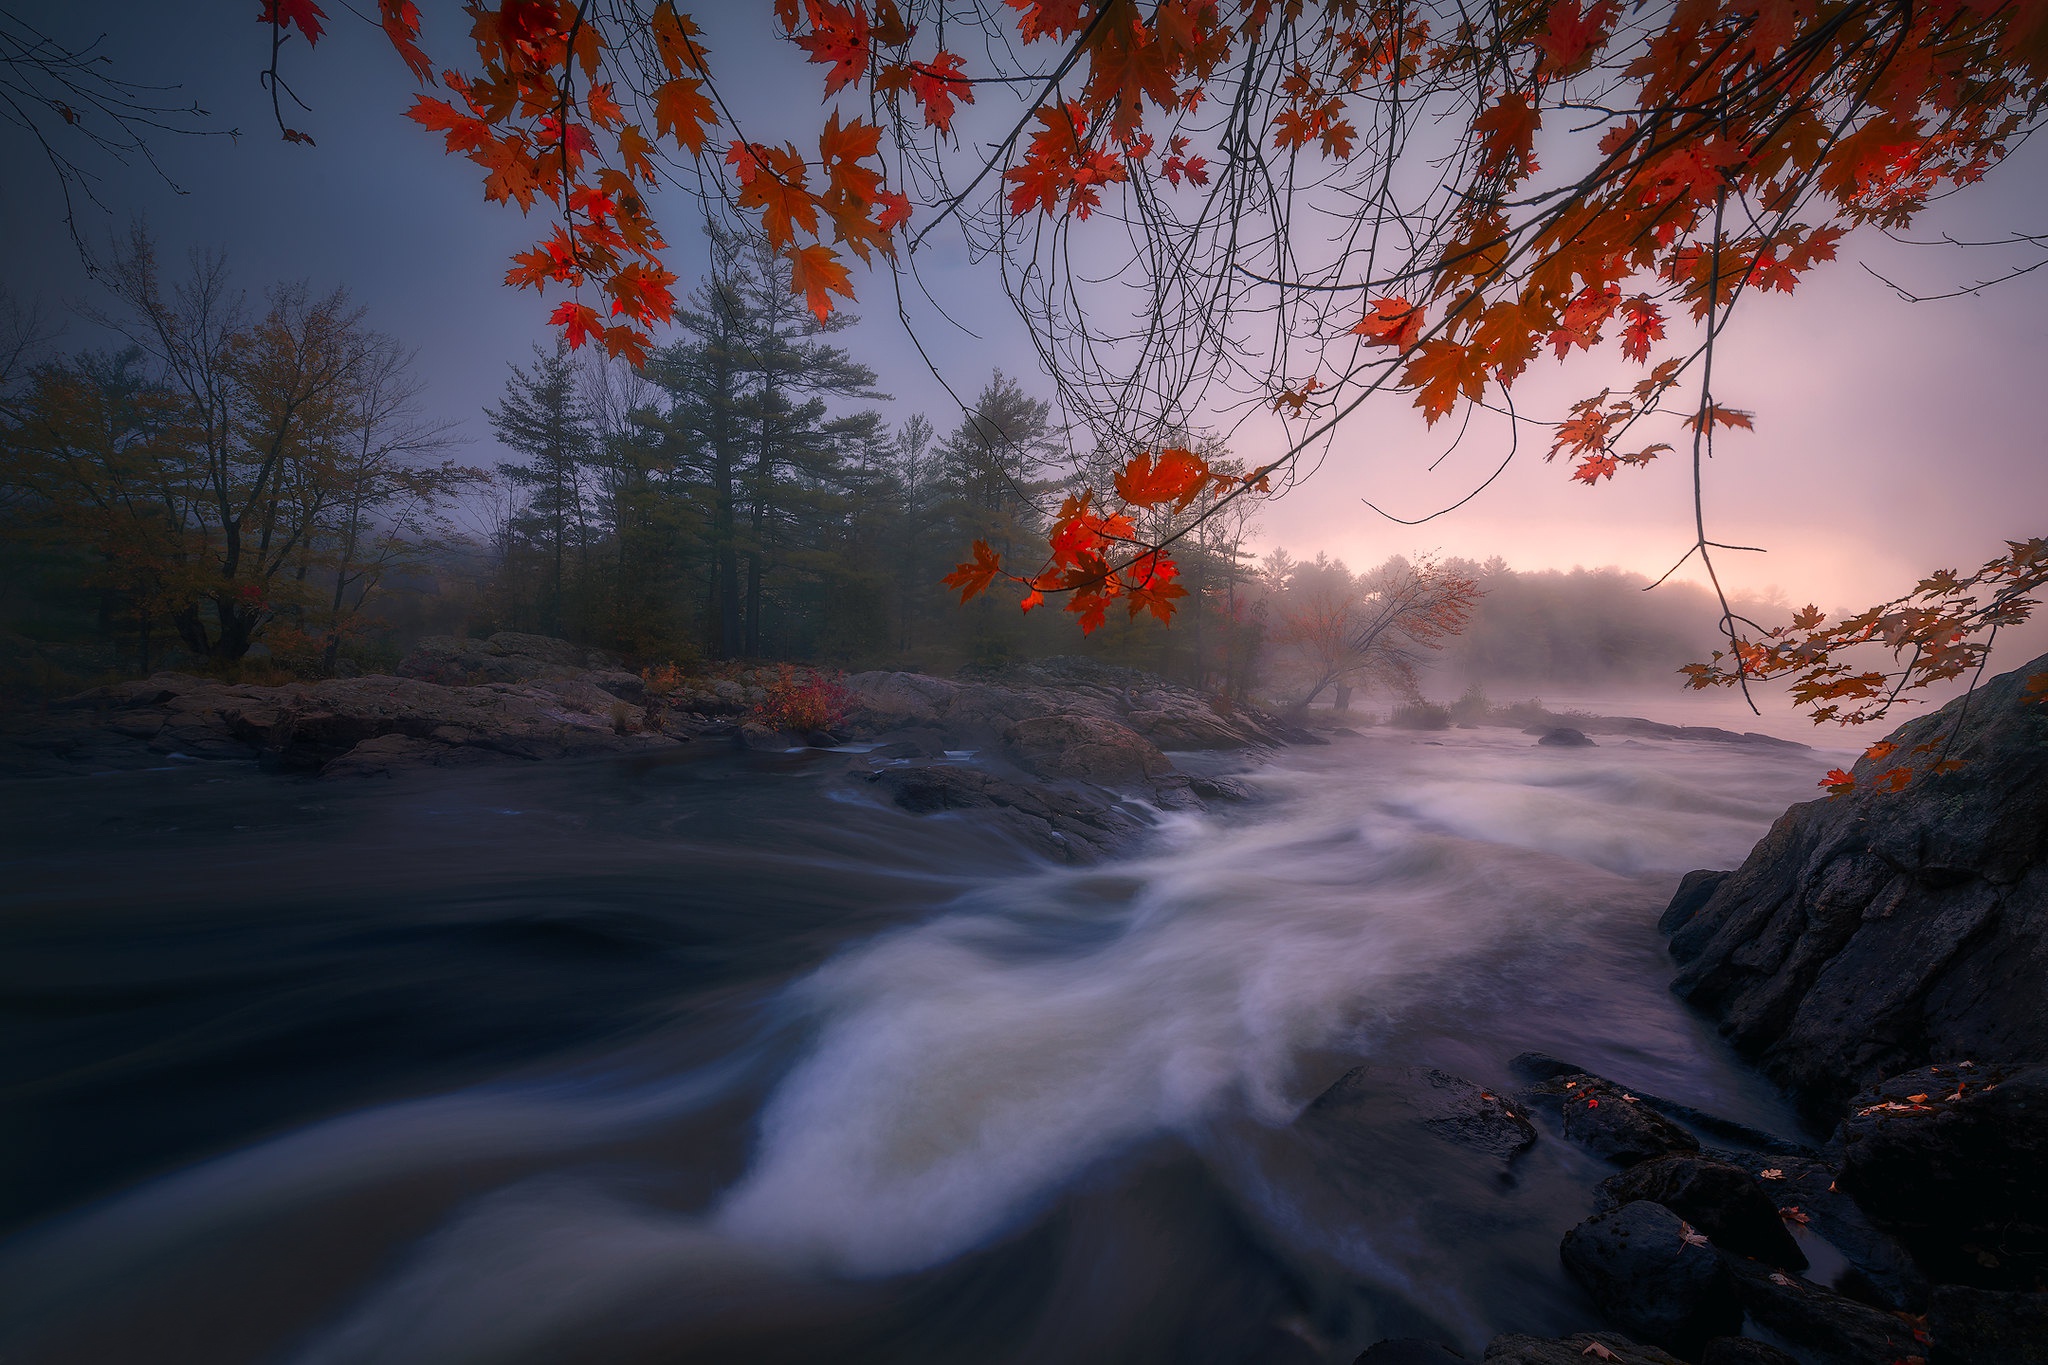 General 2048x1365 river water leaves outdoors nature long exposure fall